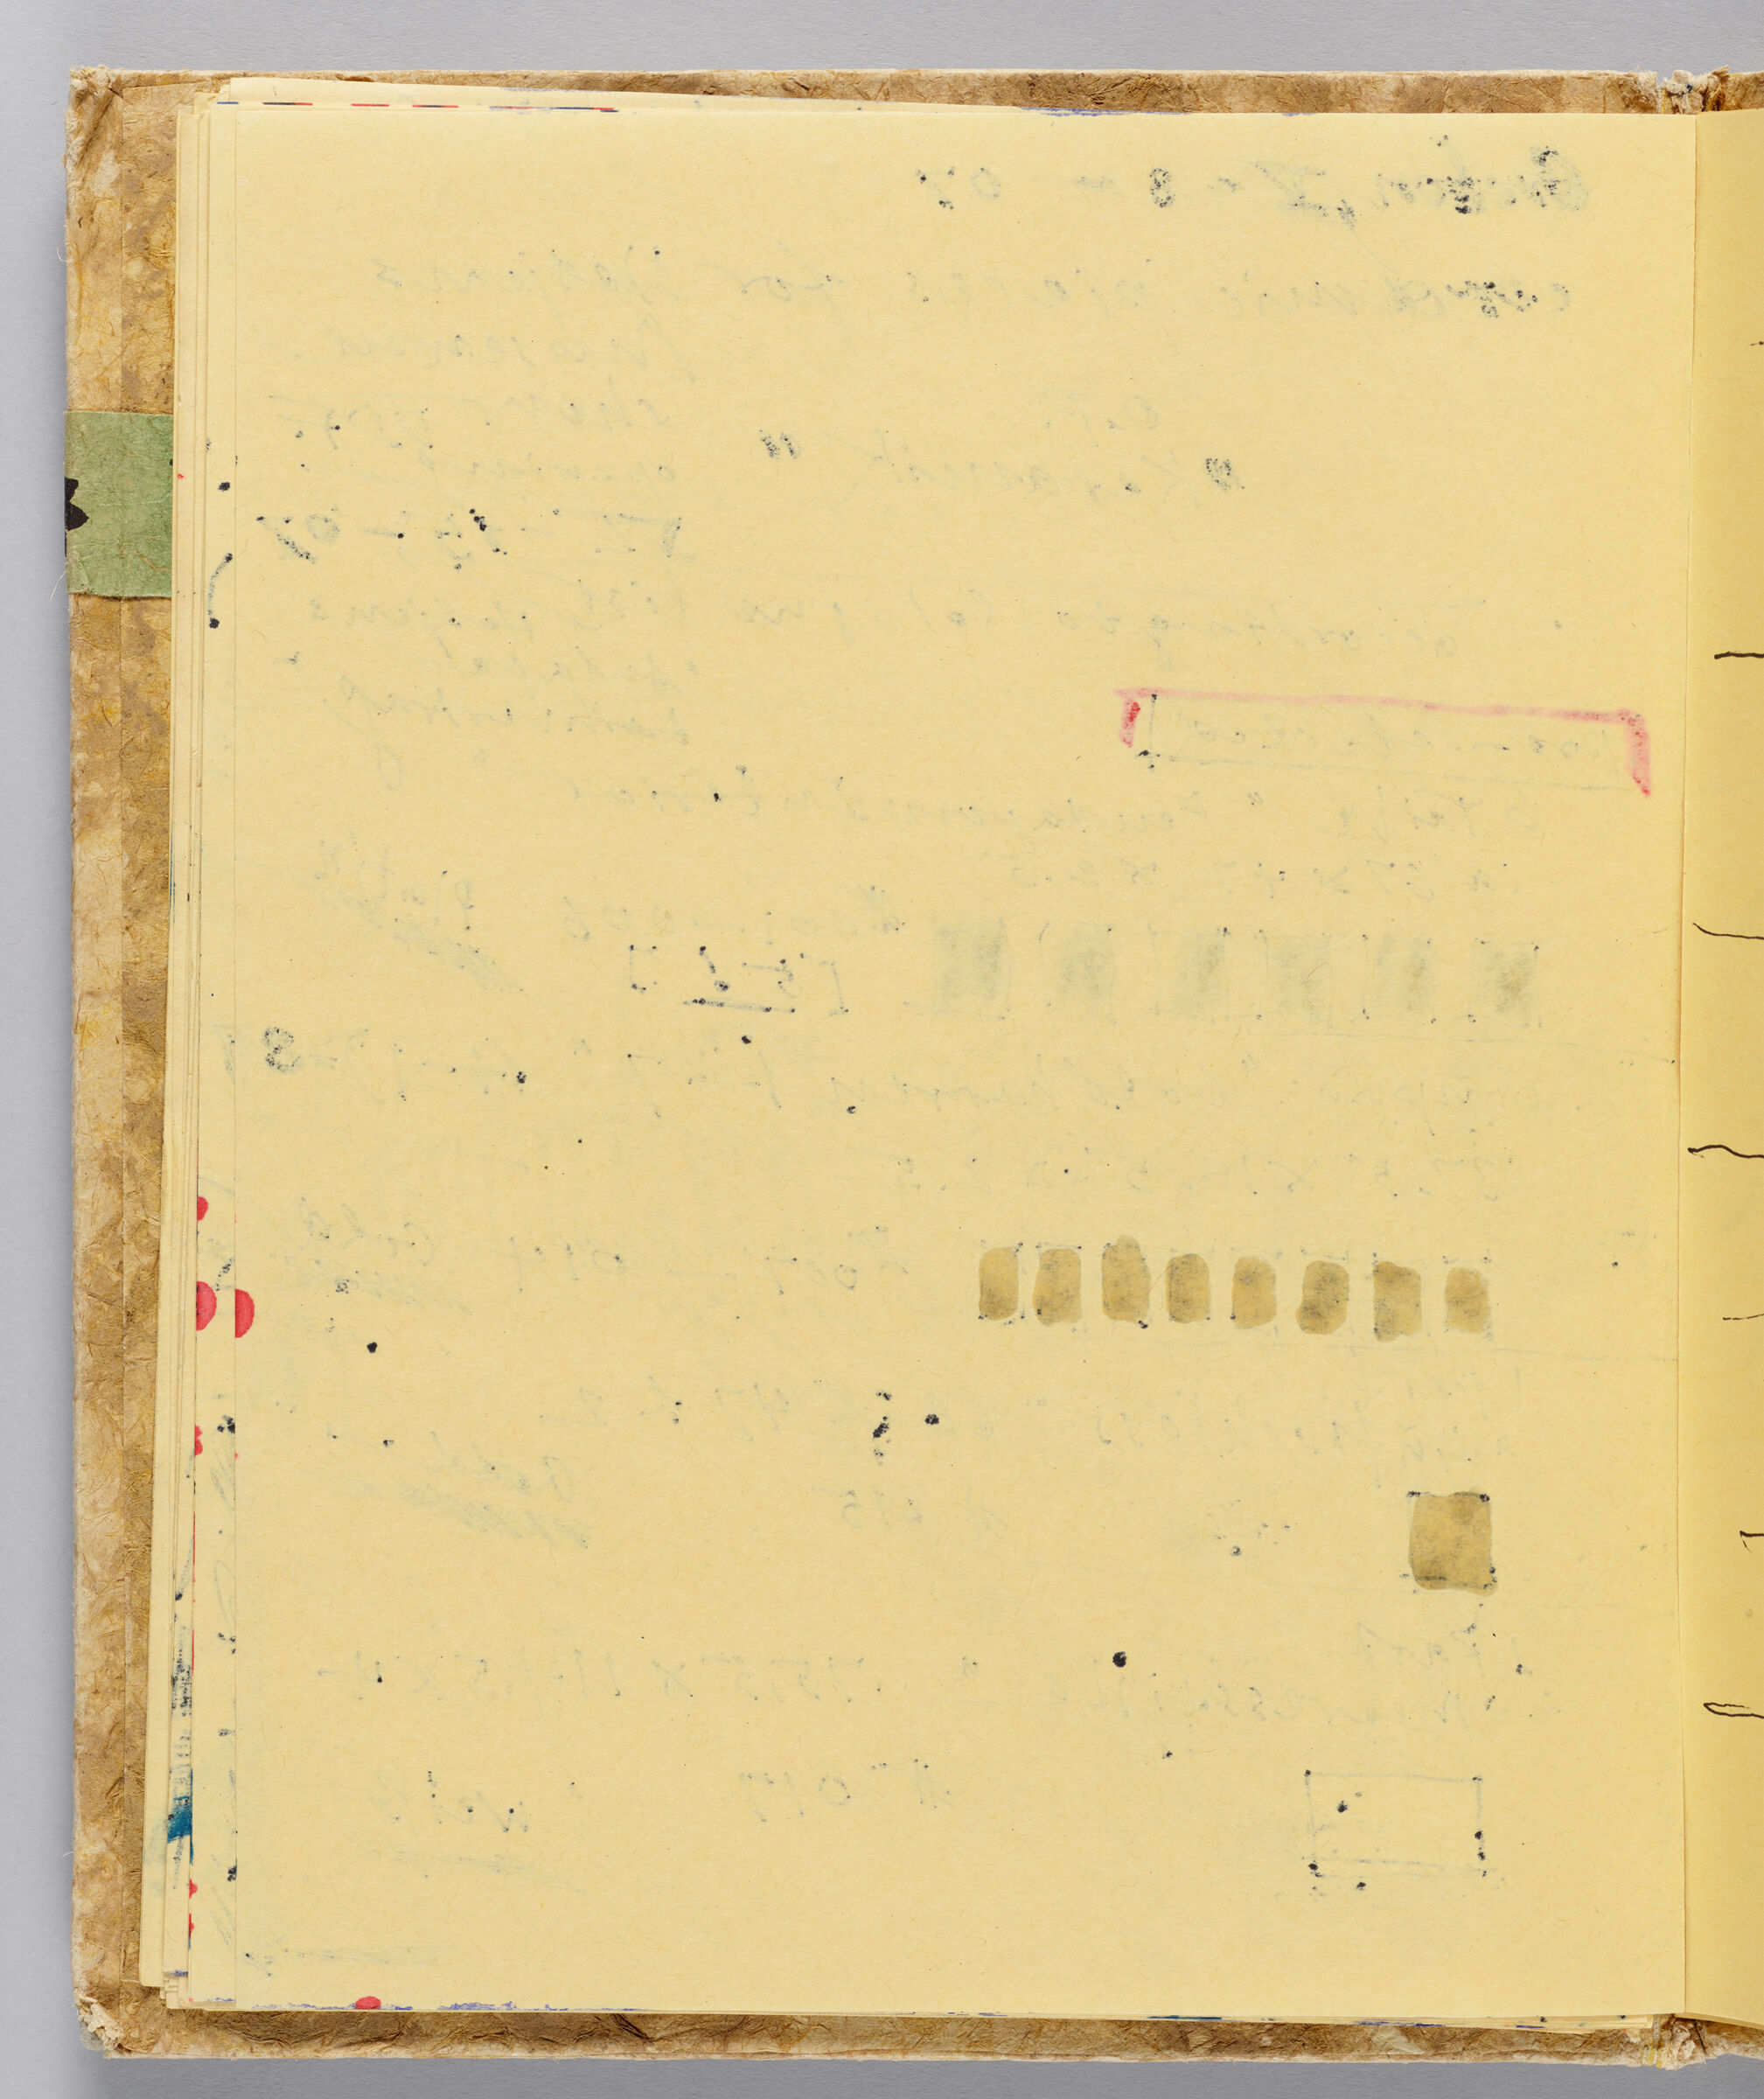 Untitled (Bleed-Through Of Previous Page, Left Page); Untitled (Notes And Measurements For Exhibition Of Ceramic Works, Right Page)